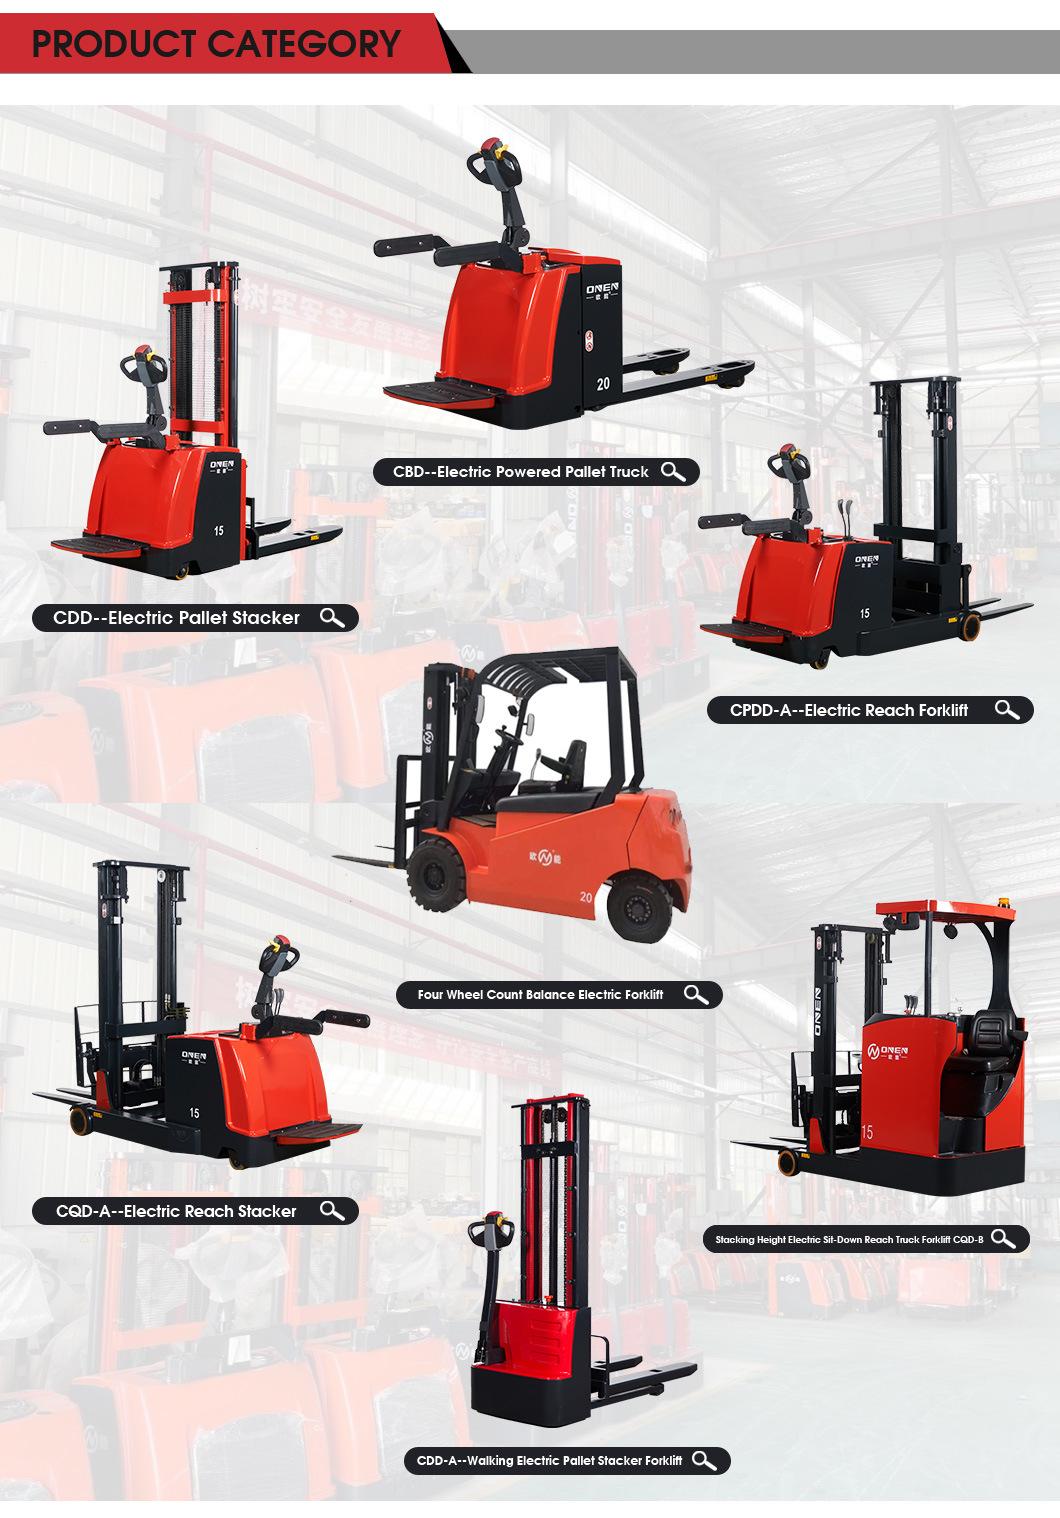 Mic Awards Silver Awards Winning Made in China Factory Price 2000-5000kg Lead-Acid or Lithium Batteries Operate Electric Pallet Truck Forklift with CE ISO